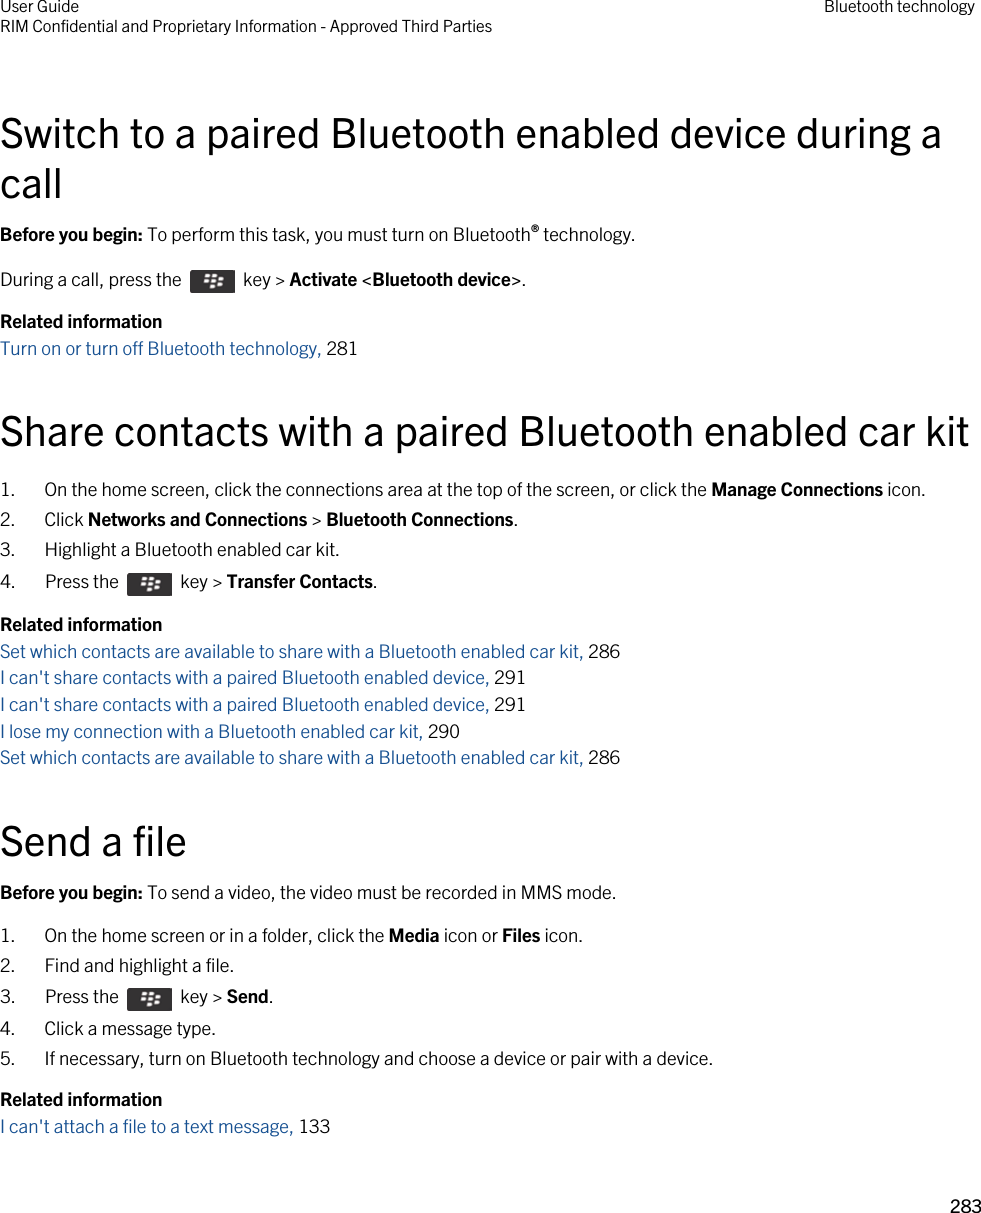 Switch to a paired Bluetooth enabled device during a callBefore you begin: To perform this task, you must turn on Bluetooth® technology.During a call, press the    key &gt; Activate &lt;Bluetooth device&gt;.Related informationTurn on or turn off Bluetooth technology, 281 Share contacts with a paired Bluetooth enabled car kit1. On the home screen, click the connections area at the top of the screen, or click the Manage Connections icon.2. Click Networks and Connections &gt; Bluetooth Connections.3. Highlight a Bluetooth enabled car kit.4.  Press the    key &gt; Transfer Contacts. Related informationSet which contacts are available to share with a Bluetooth enabled car kit, 286I can&apos;t share contacts with a paired Bluetooth enabled device, 291I can&apos;t share contacts with a paired Bluetooth enabled device, 291I lose my connection with a Bluetooth enabled car kit, 290Set which contacts are available to share with a Bluetooth enabled car kit, 286Send a fileBefore you begin: To send a video, the video must be recorded in MMS mode.1. On the home screen or in a folder, click the Media icon or Files icon.2. Find and highlight a file.3.  Press the    key &gt; Send. 4. Click a message type.5. If necessary, turn on Bluetooth technology and choose a device or pair with a device.Related informationI can&apos;t attach a file to a text message, 133 User GuideRIM Confidential and Proprietary Information - Approved Third Parties Bluetooth technology283 